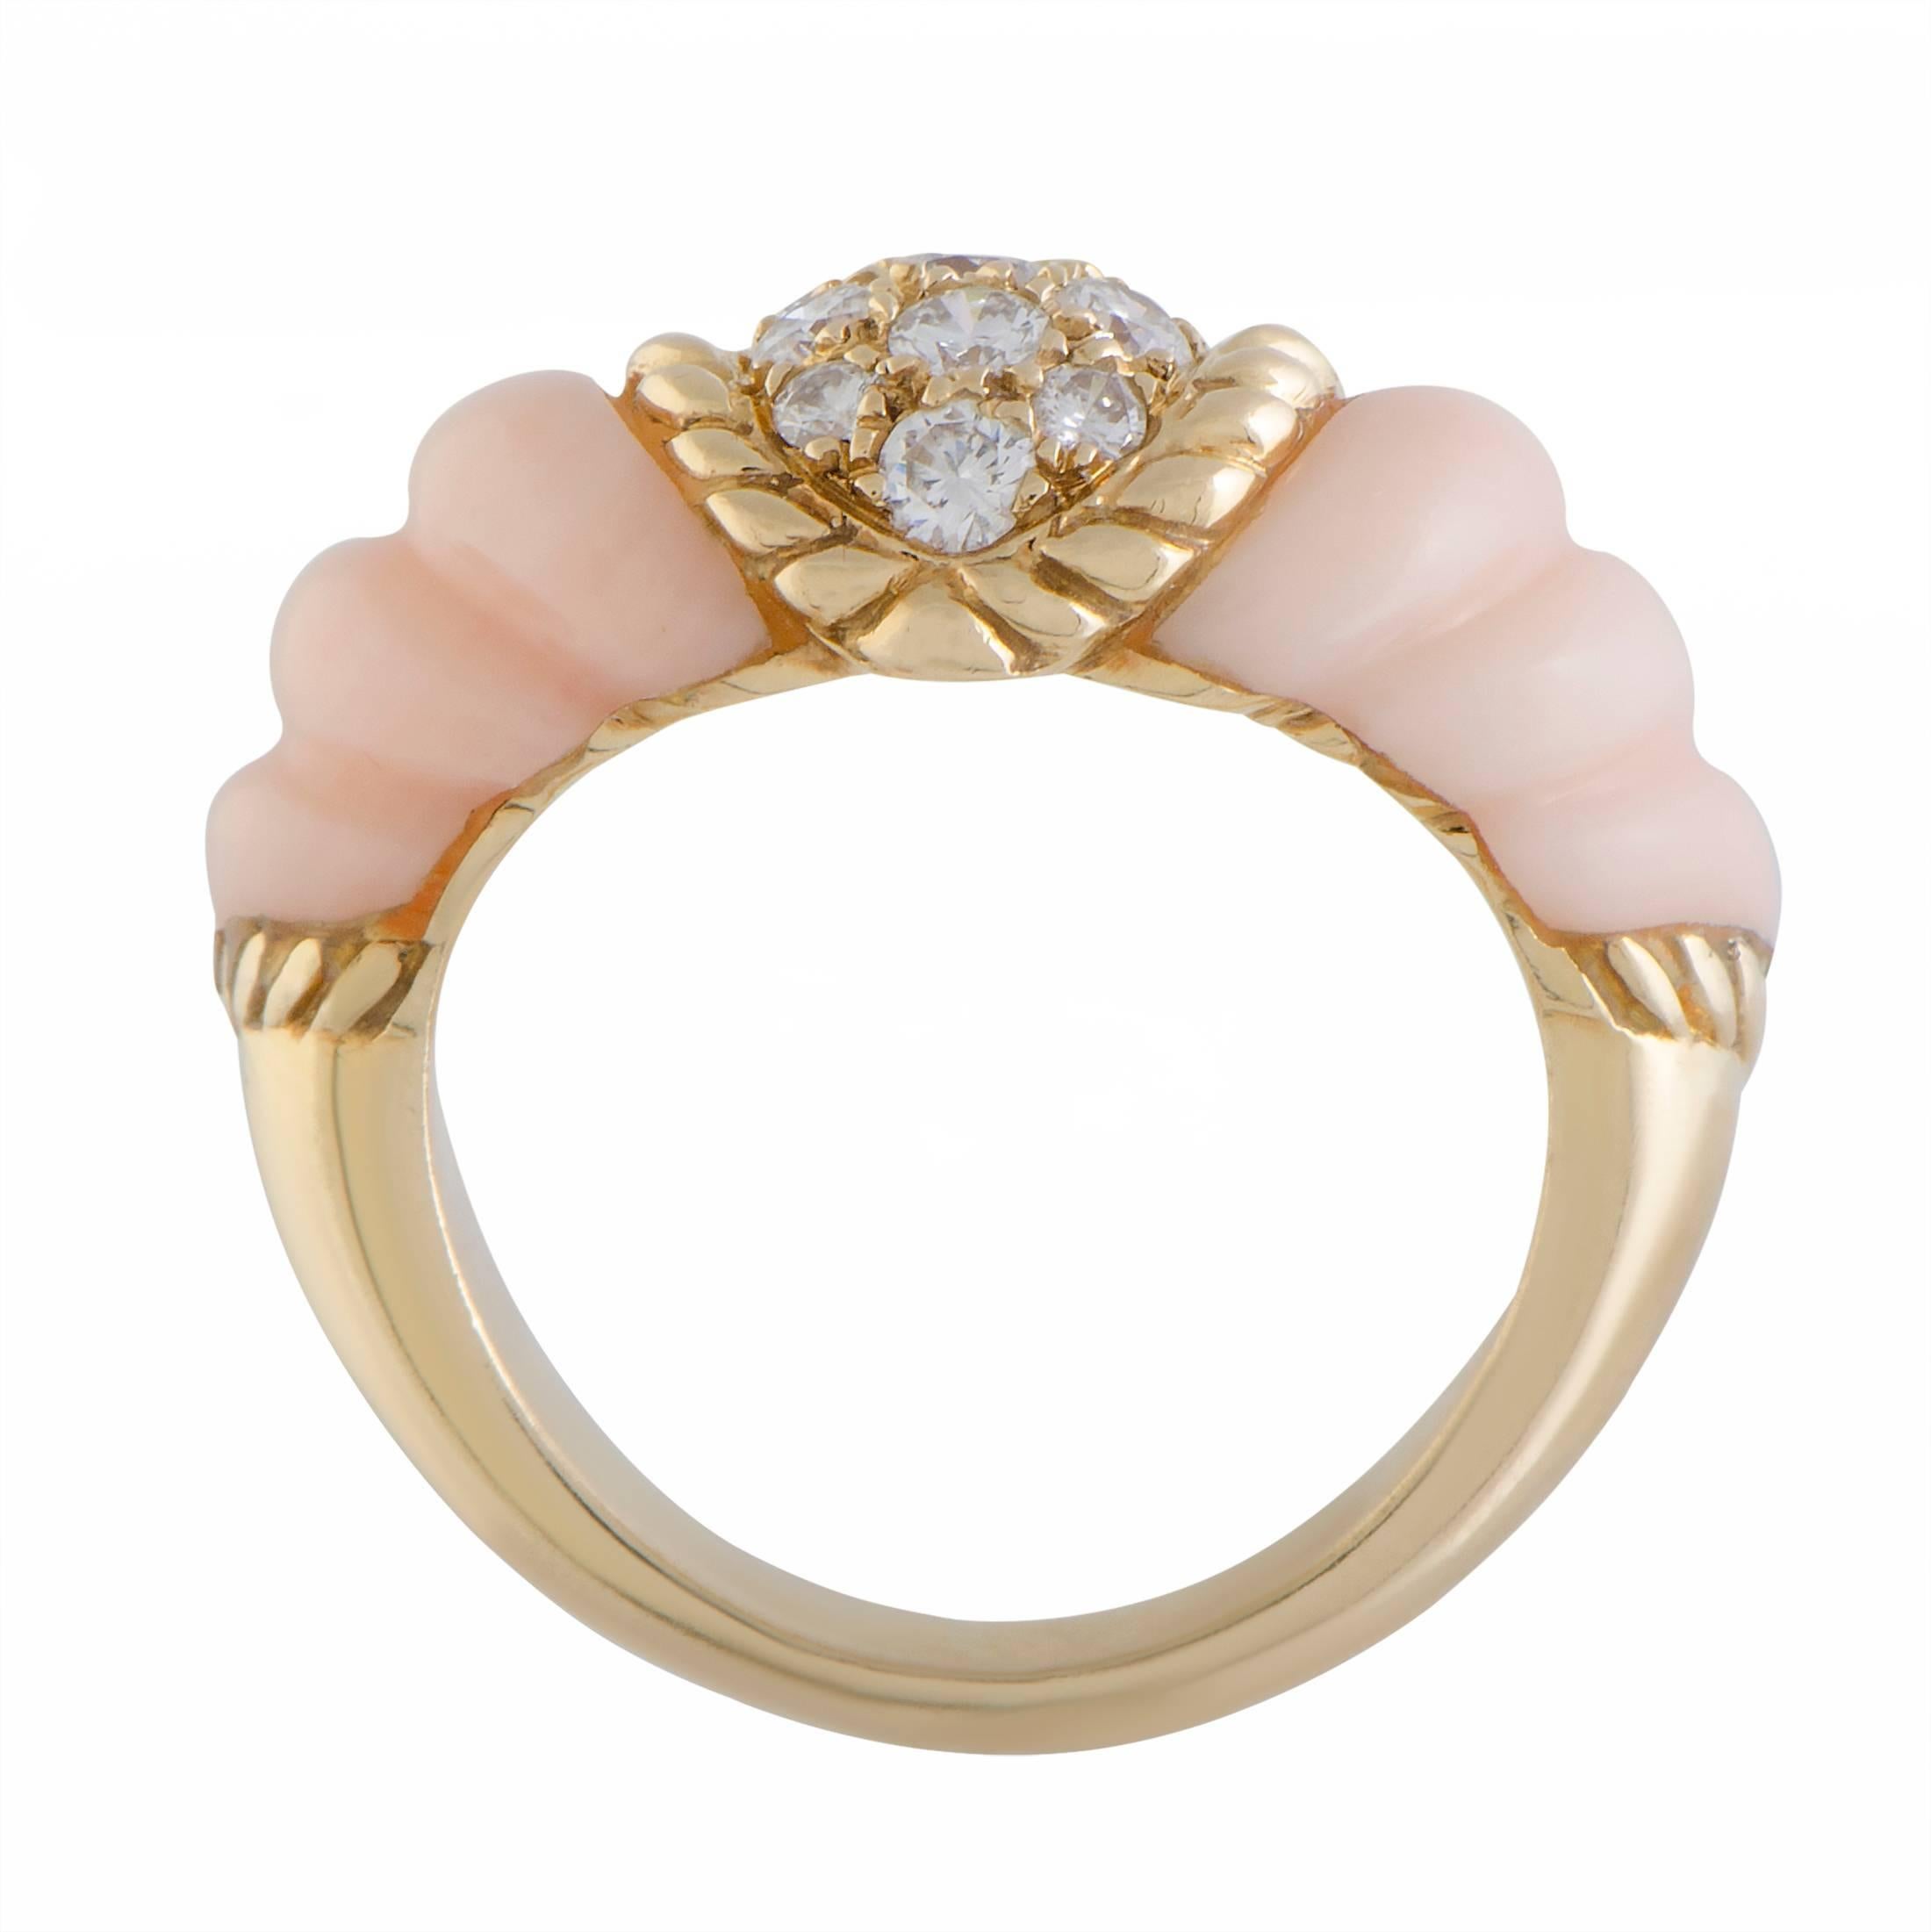 Style and elegance are embodied in this gorgeous 18K yellow gold vintage ring by Boucheron. The sensational ring sparkles with 0.40ct of stunning diamonds surrounded by a beautiful use of coral that reflects the luxurious value of the spectacular